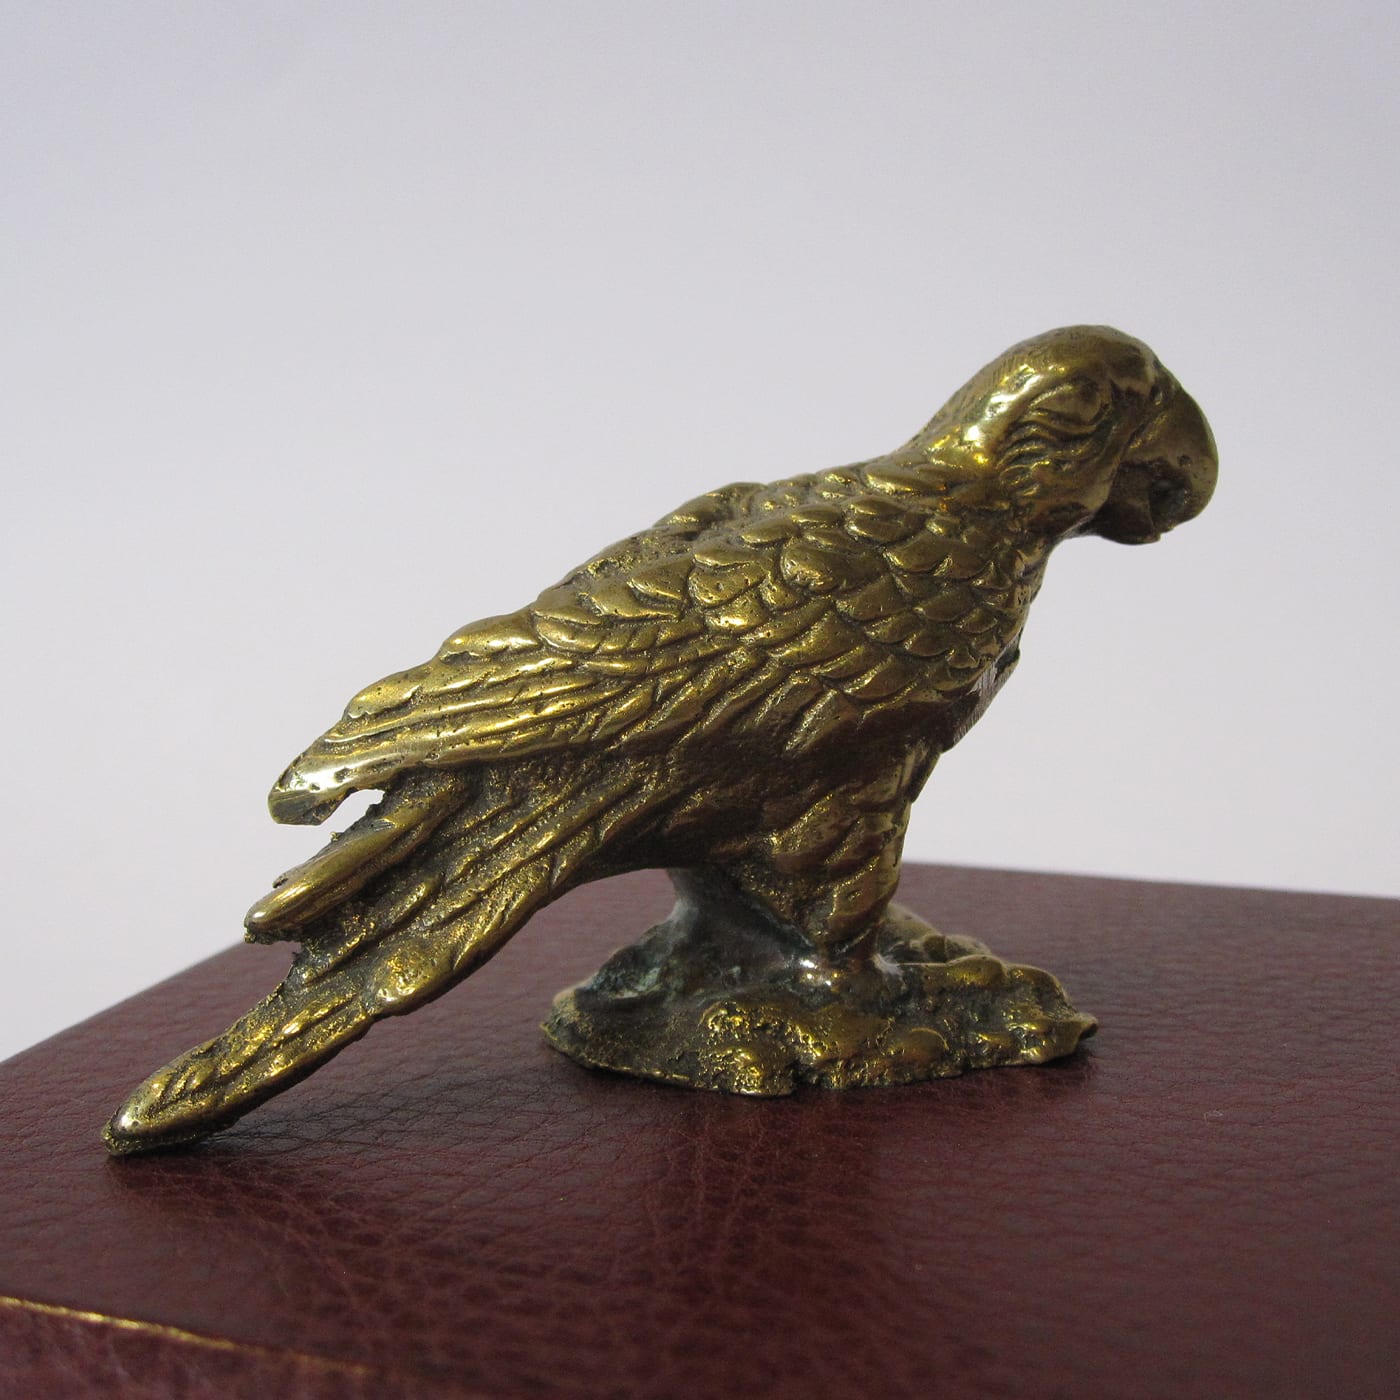 Bordeaux Leather Box with Brass Parrot - AtelierGK Firenze